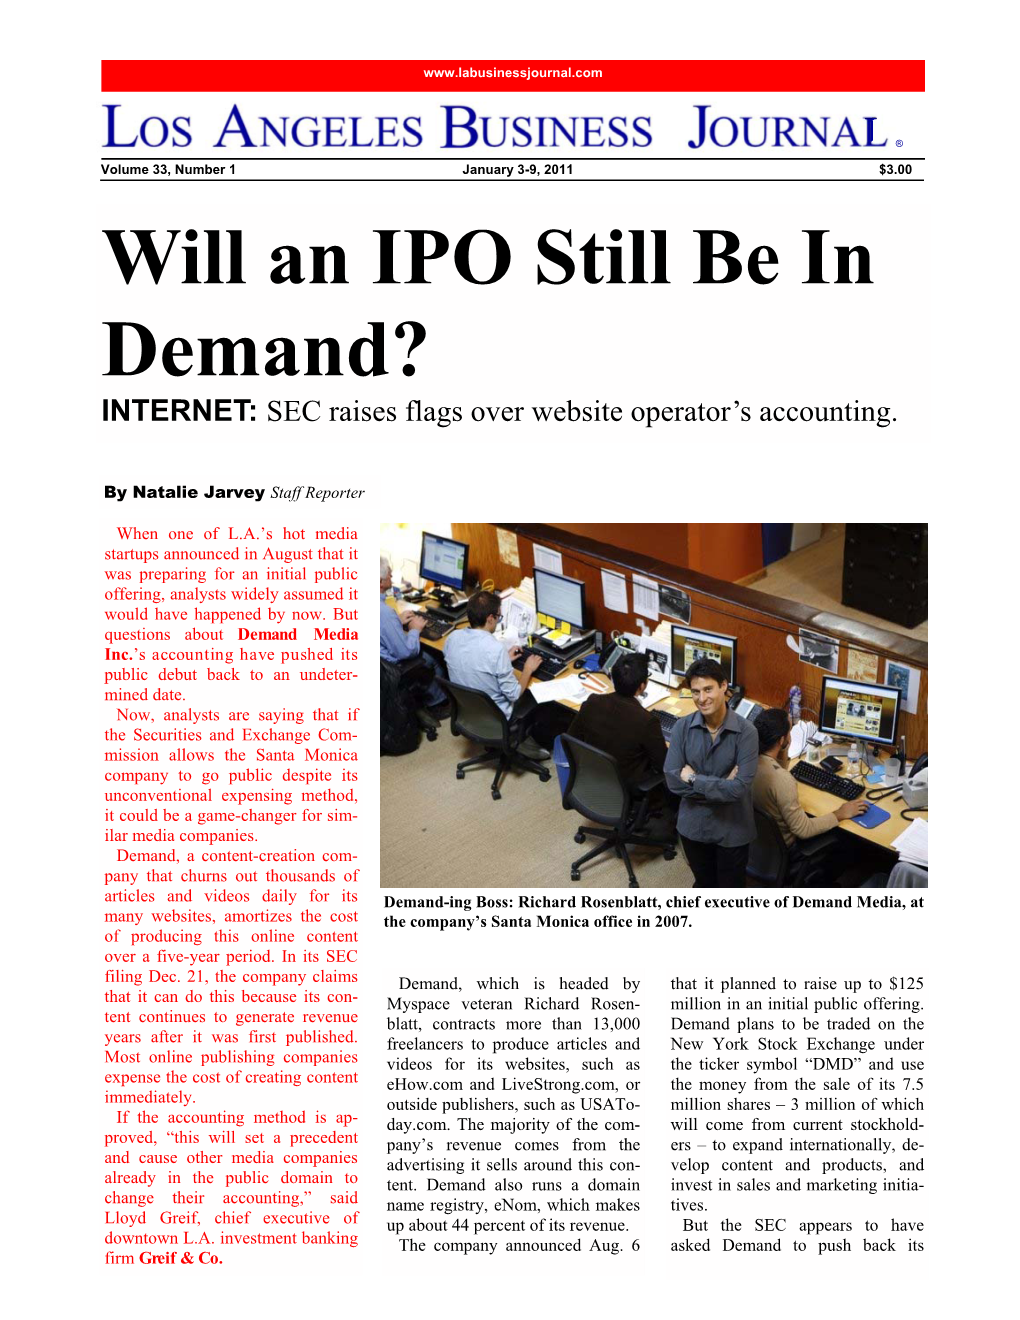 Will an IPO Still Be in Demand LABJ 010311.Pub